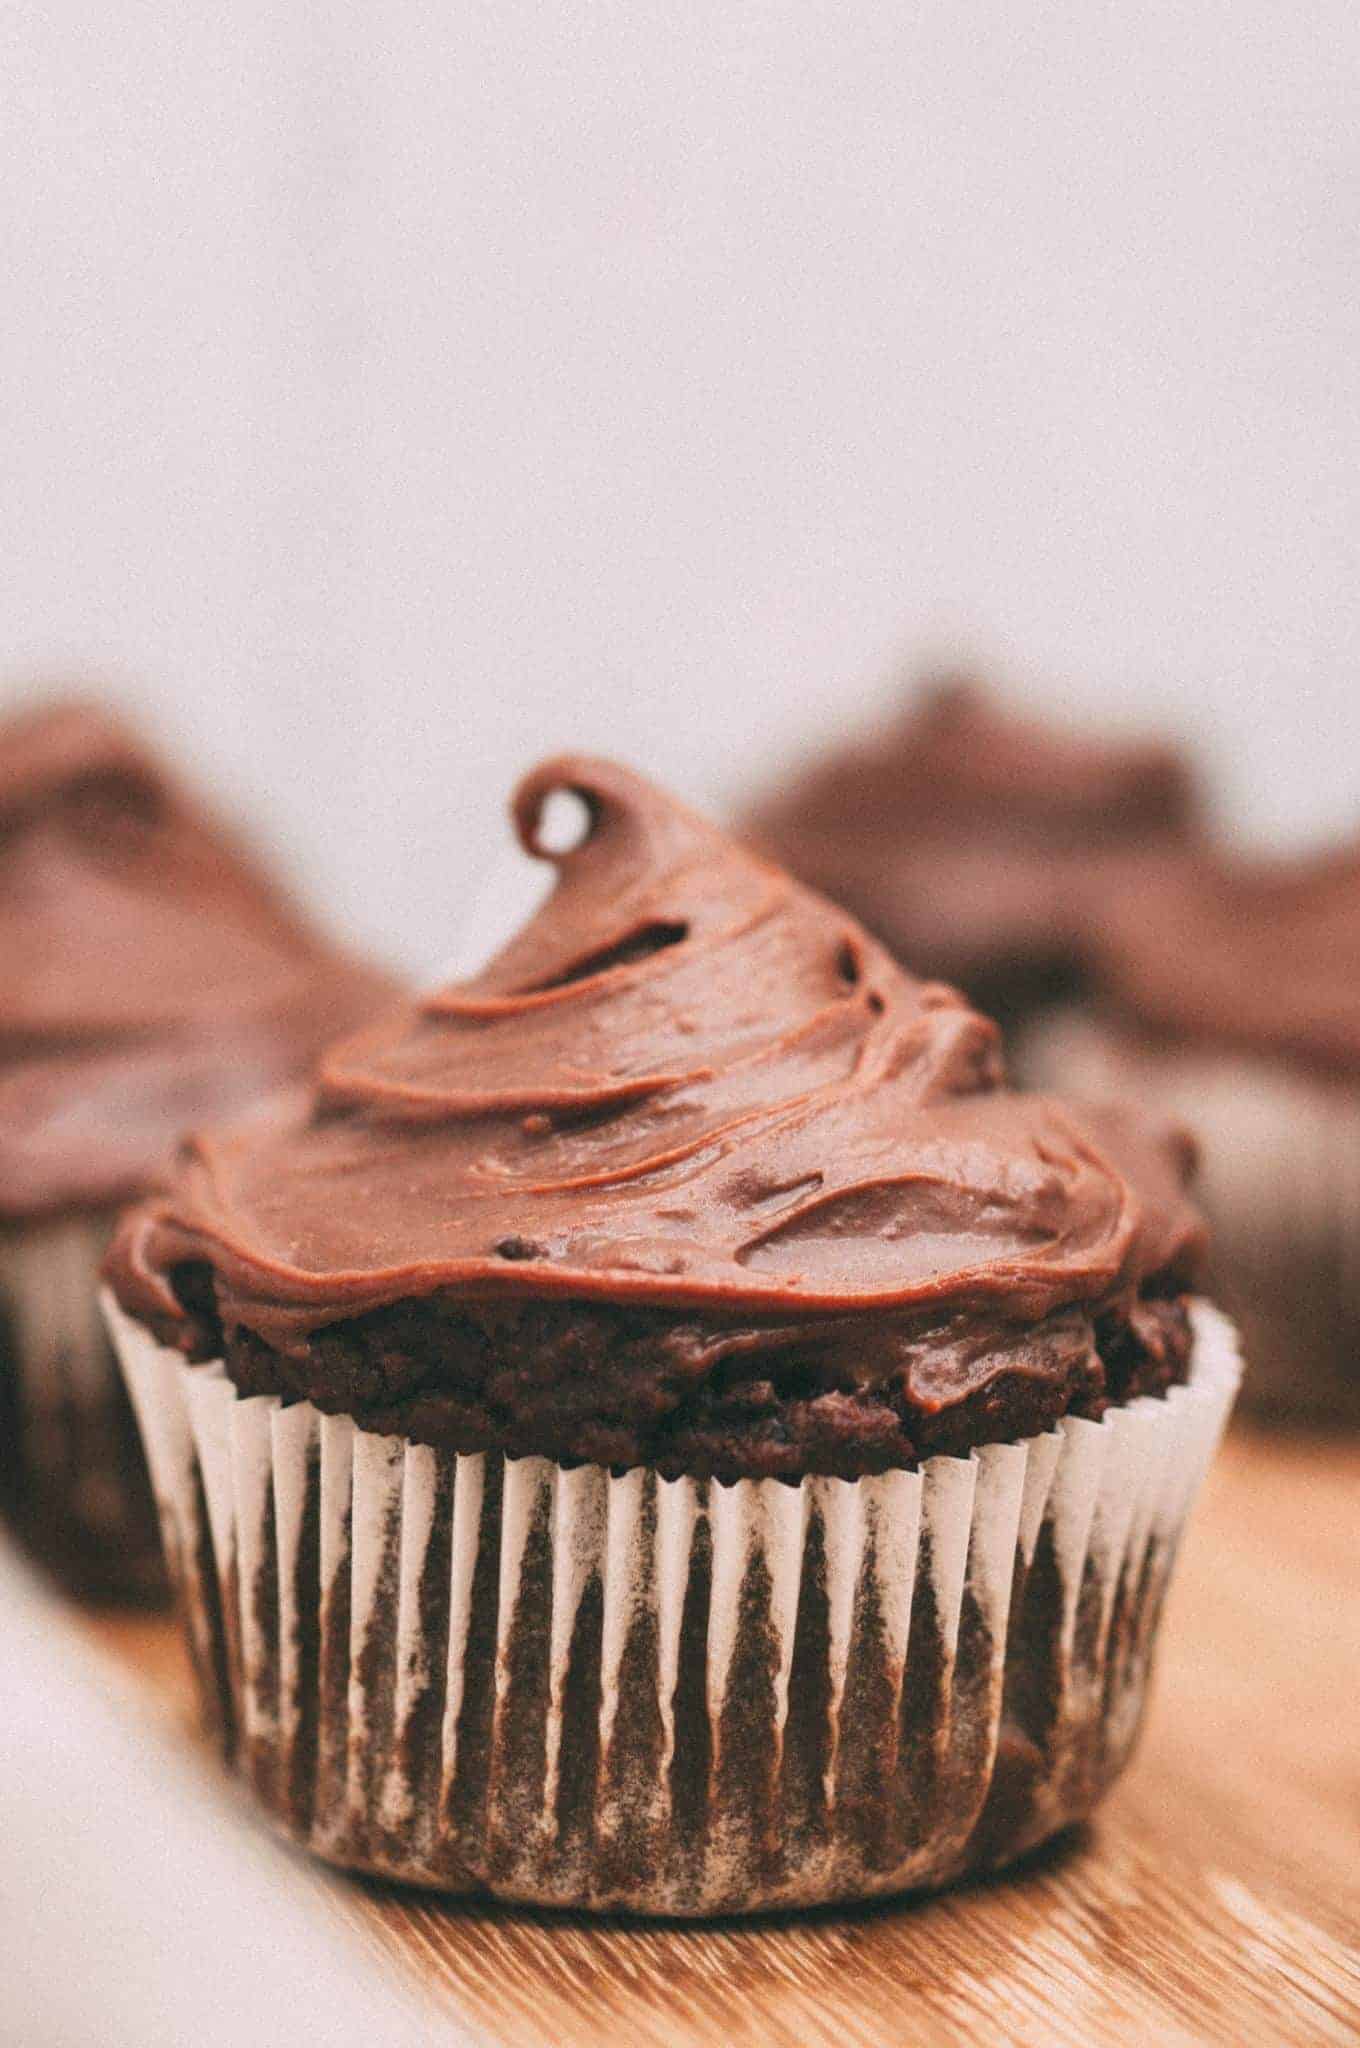 The world's best vegan cupcakes with chocolate frosting recipe